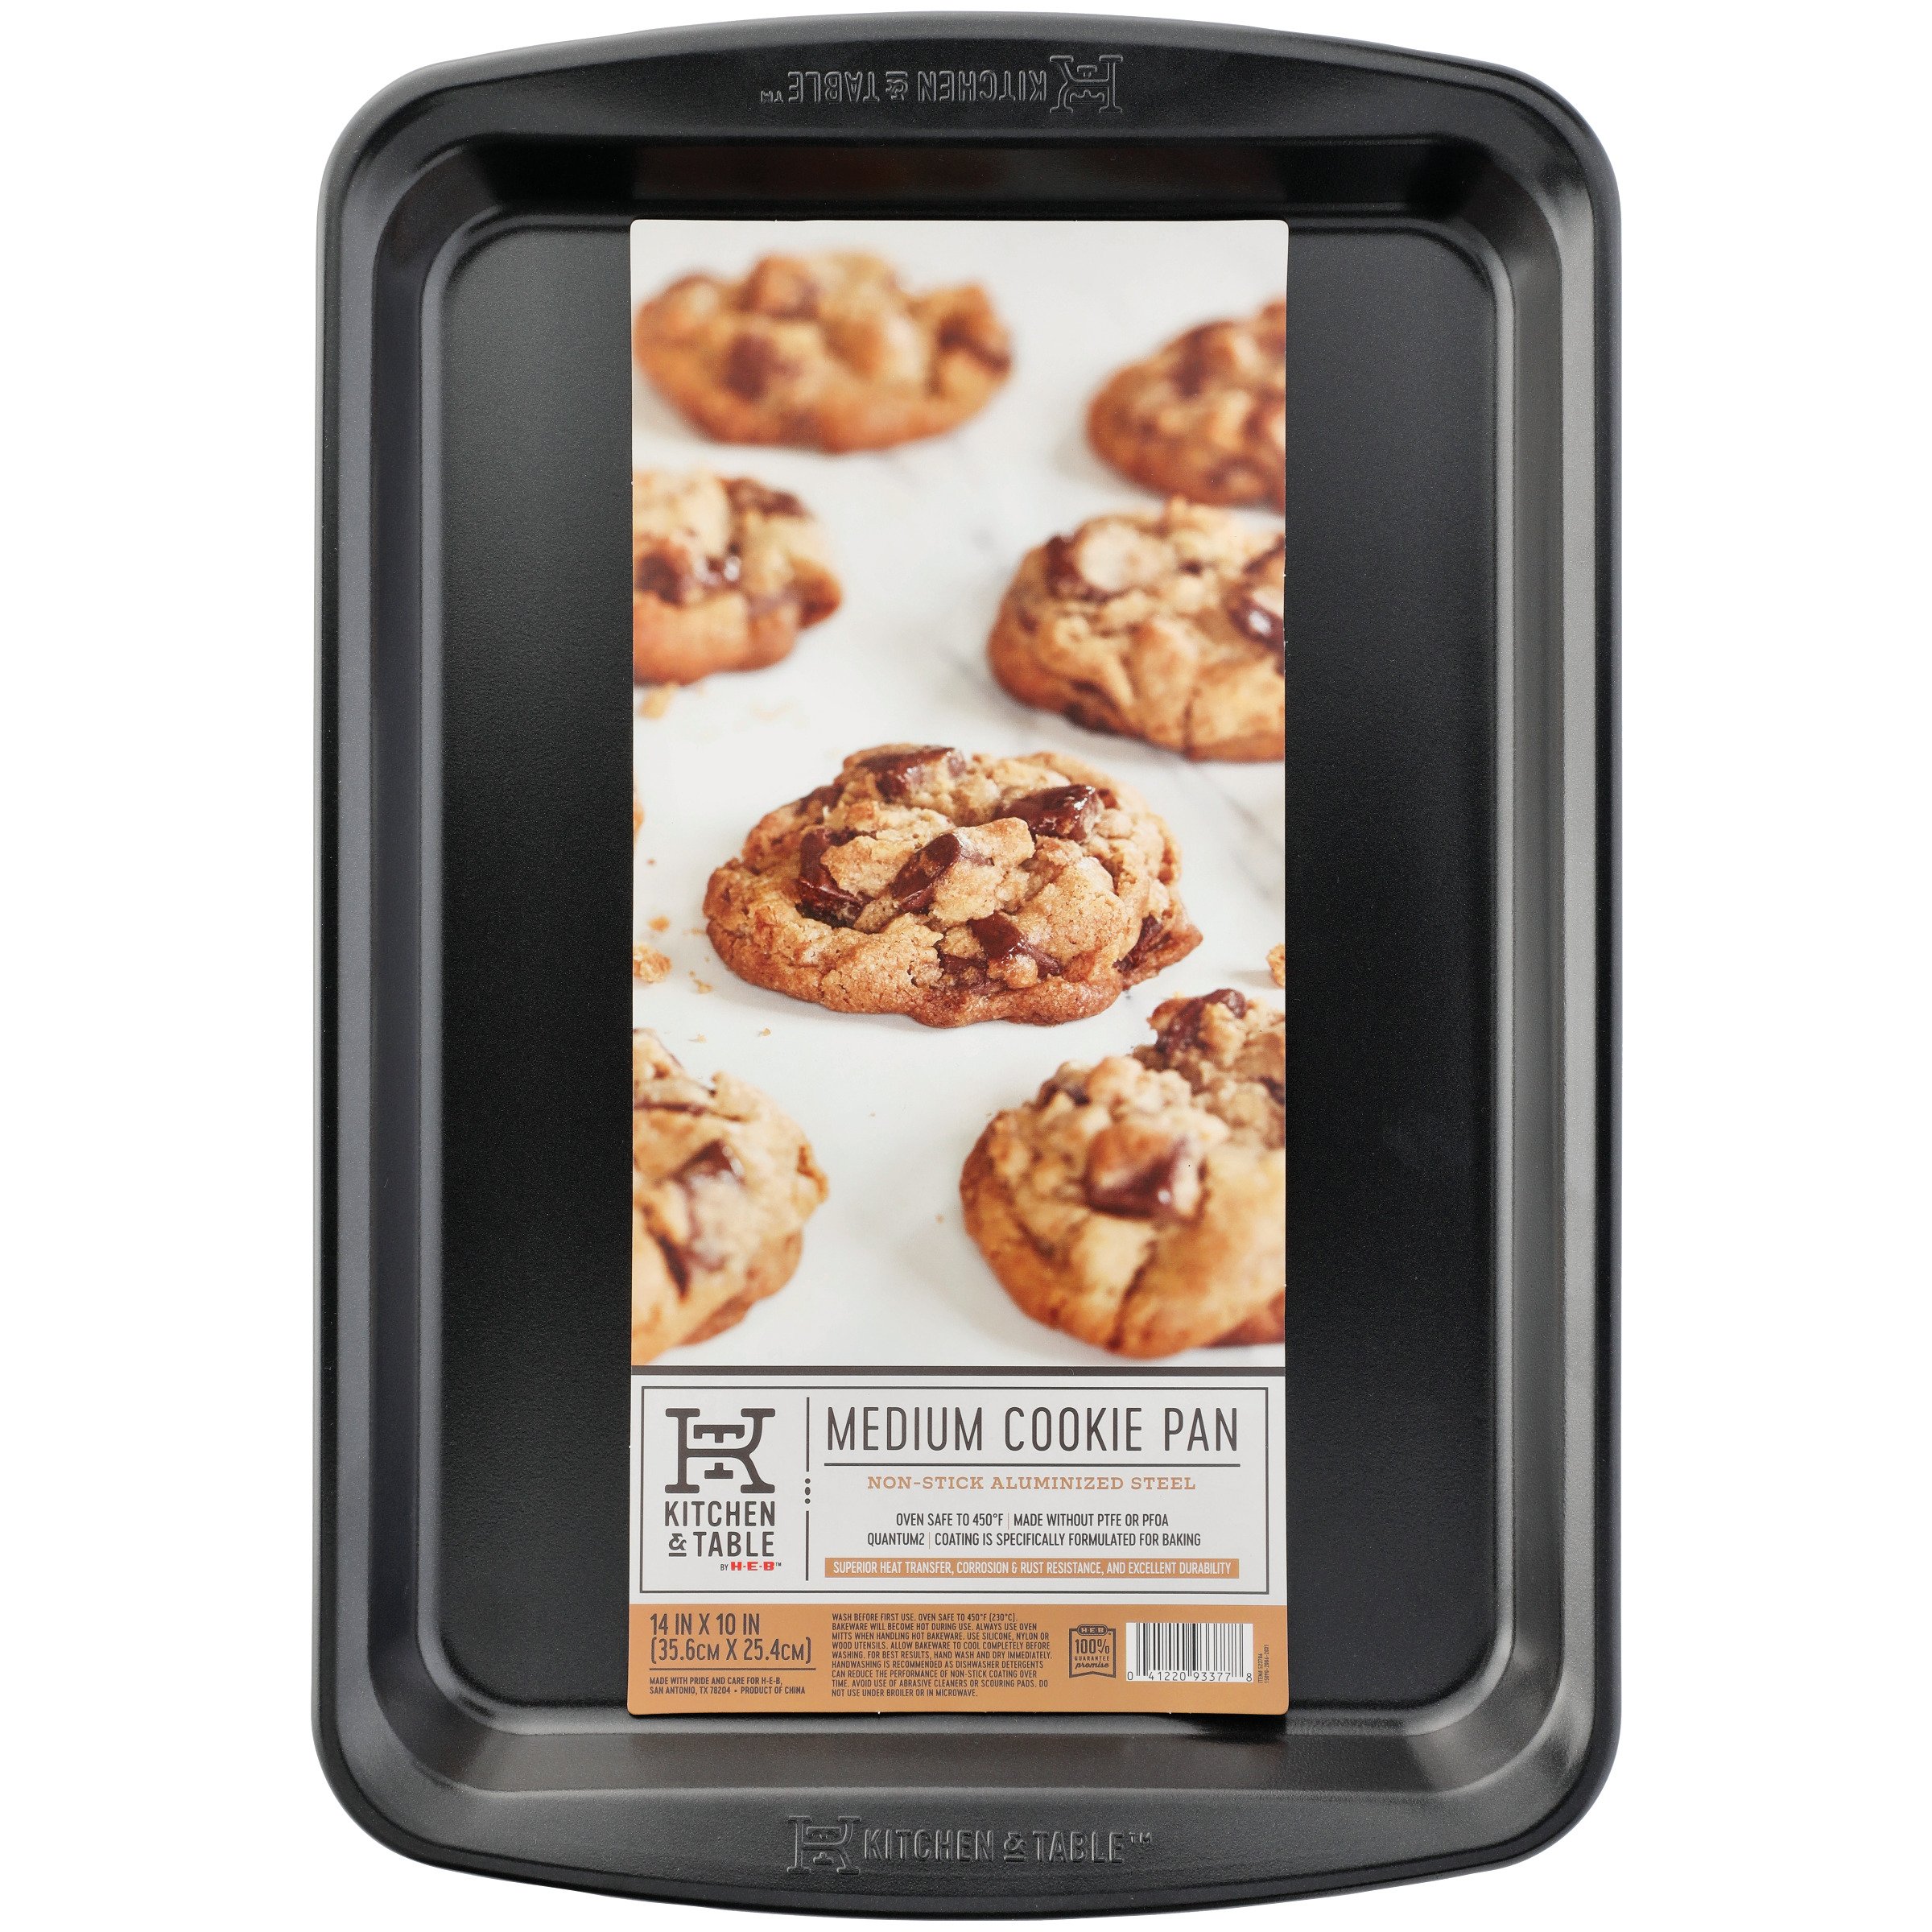 Kitchen & Table by H-E-B Gunmetal Aluminized Steel Medium Cookie Sheet -  Shop Pans & Dishes at H-E-B